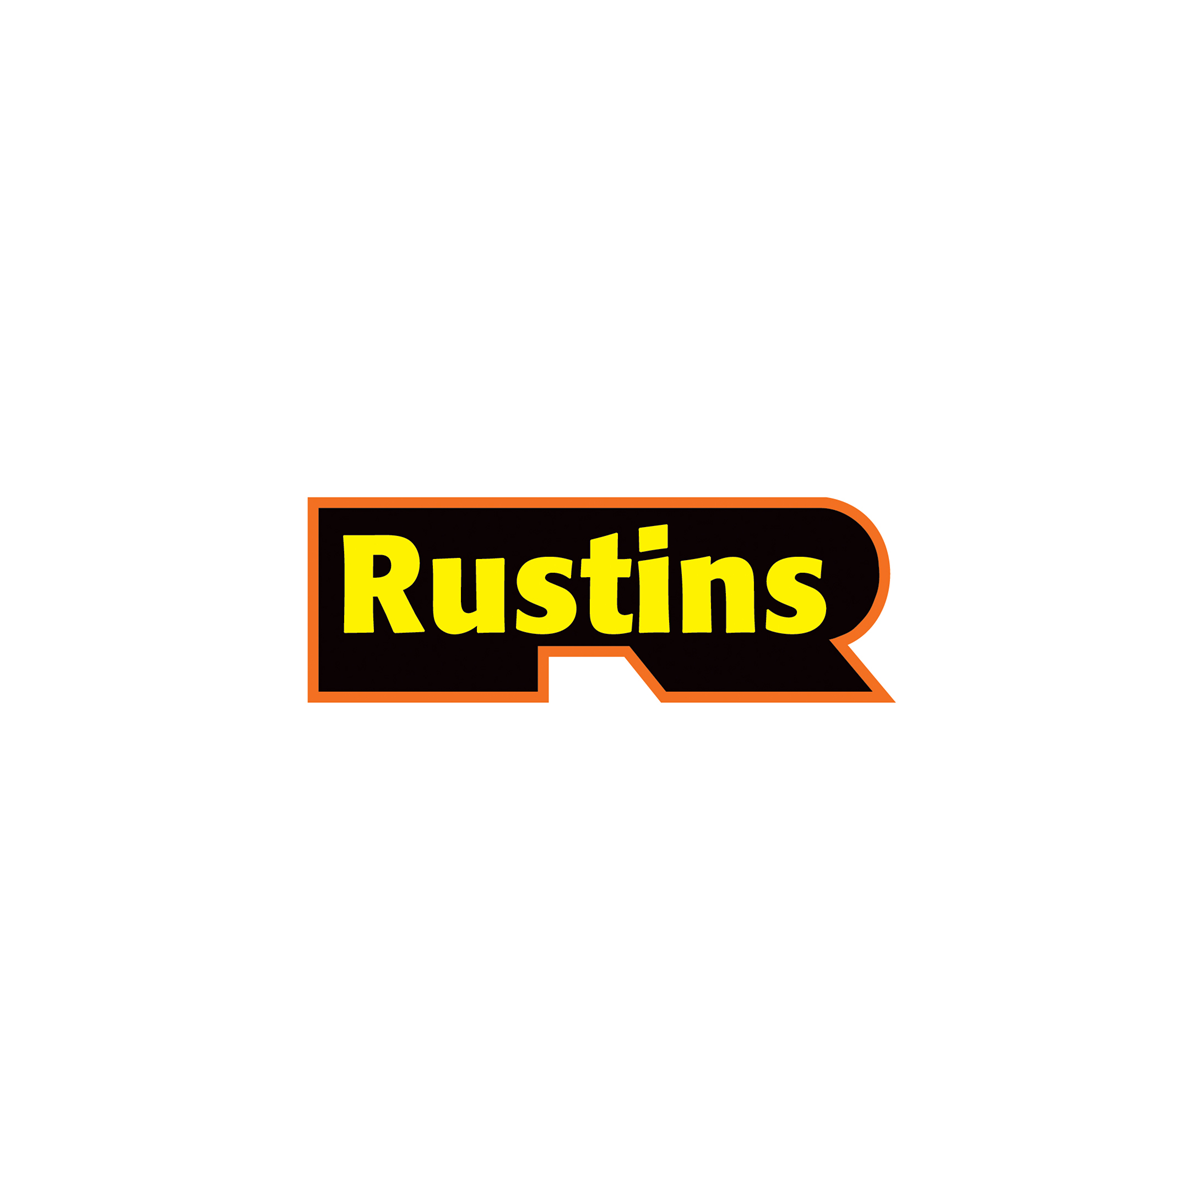 Where to buy Rustins Outdoor Varnish